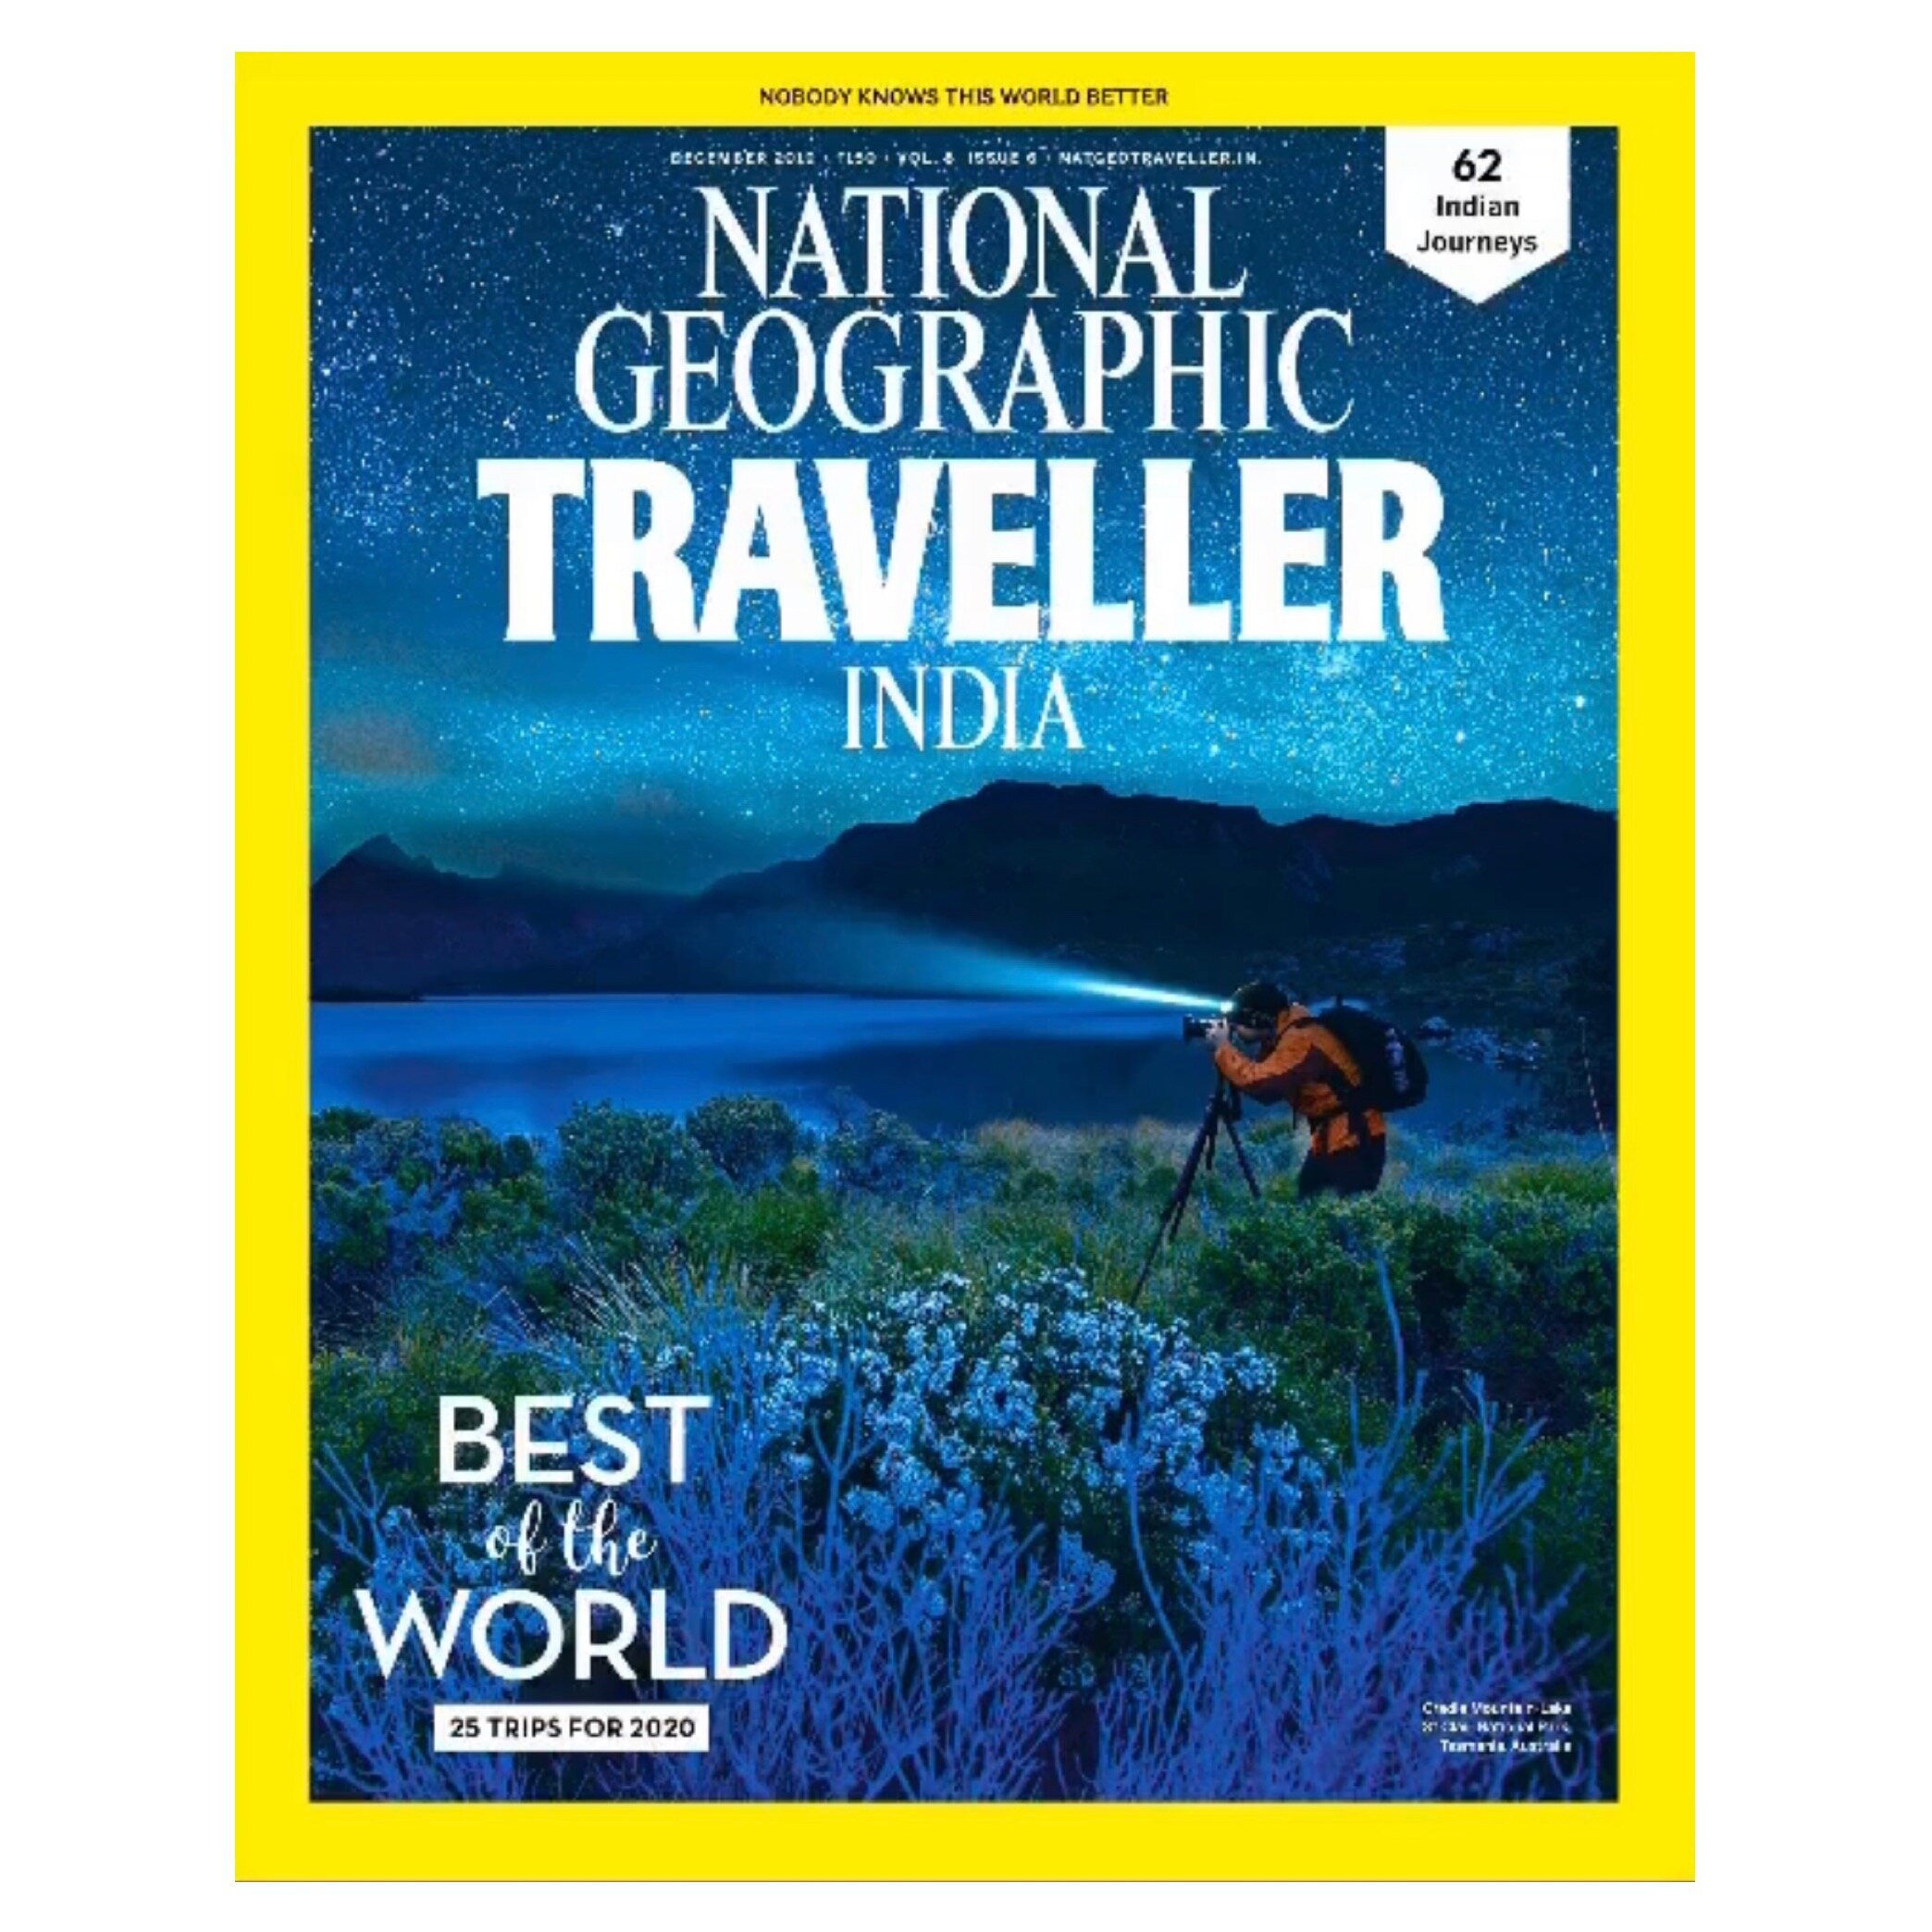 Featured in National Geographic in 2019